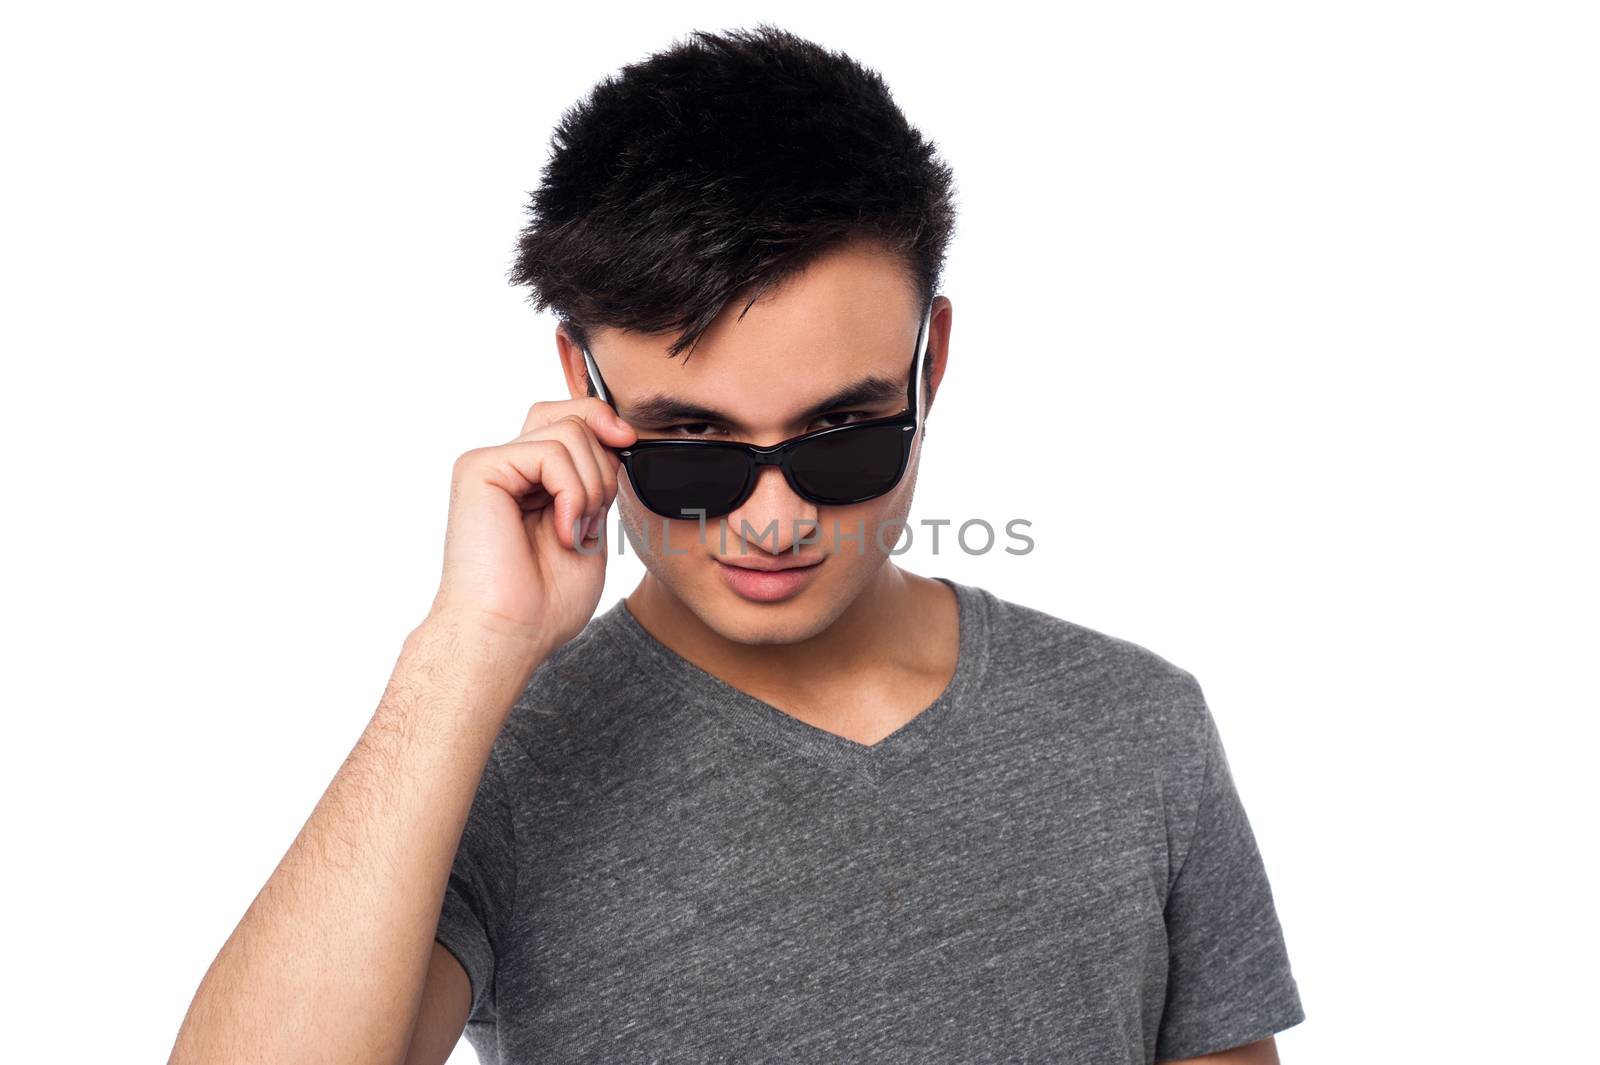 Handsome guy staring at you from within sunglasses